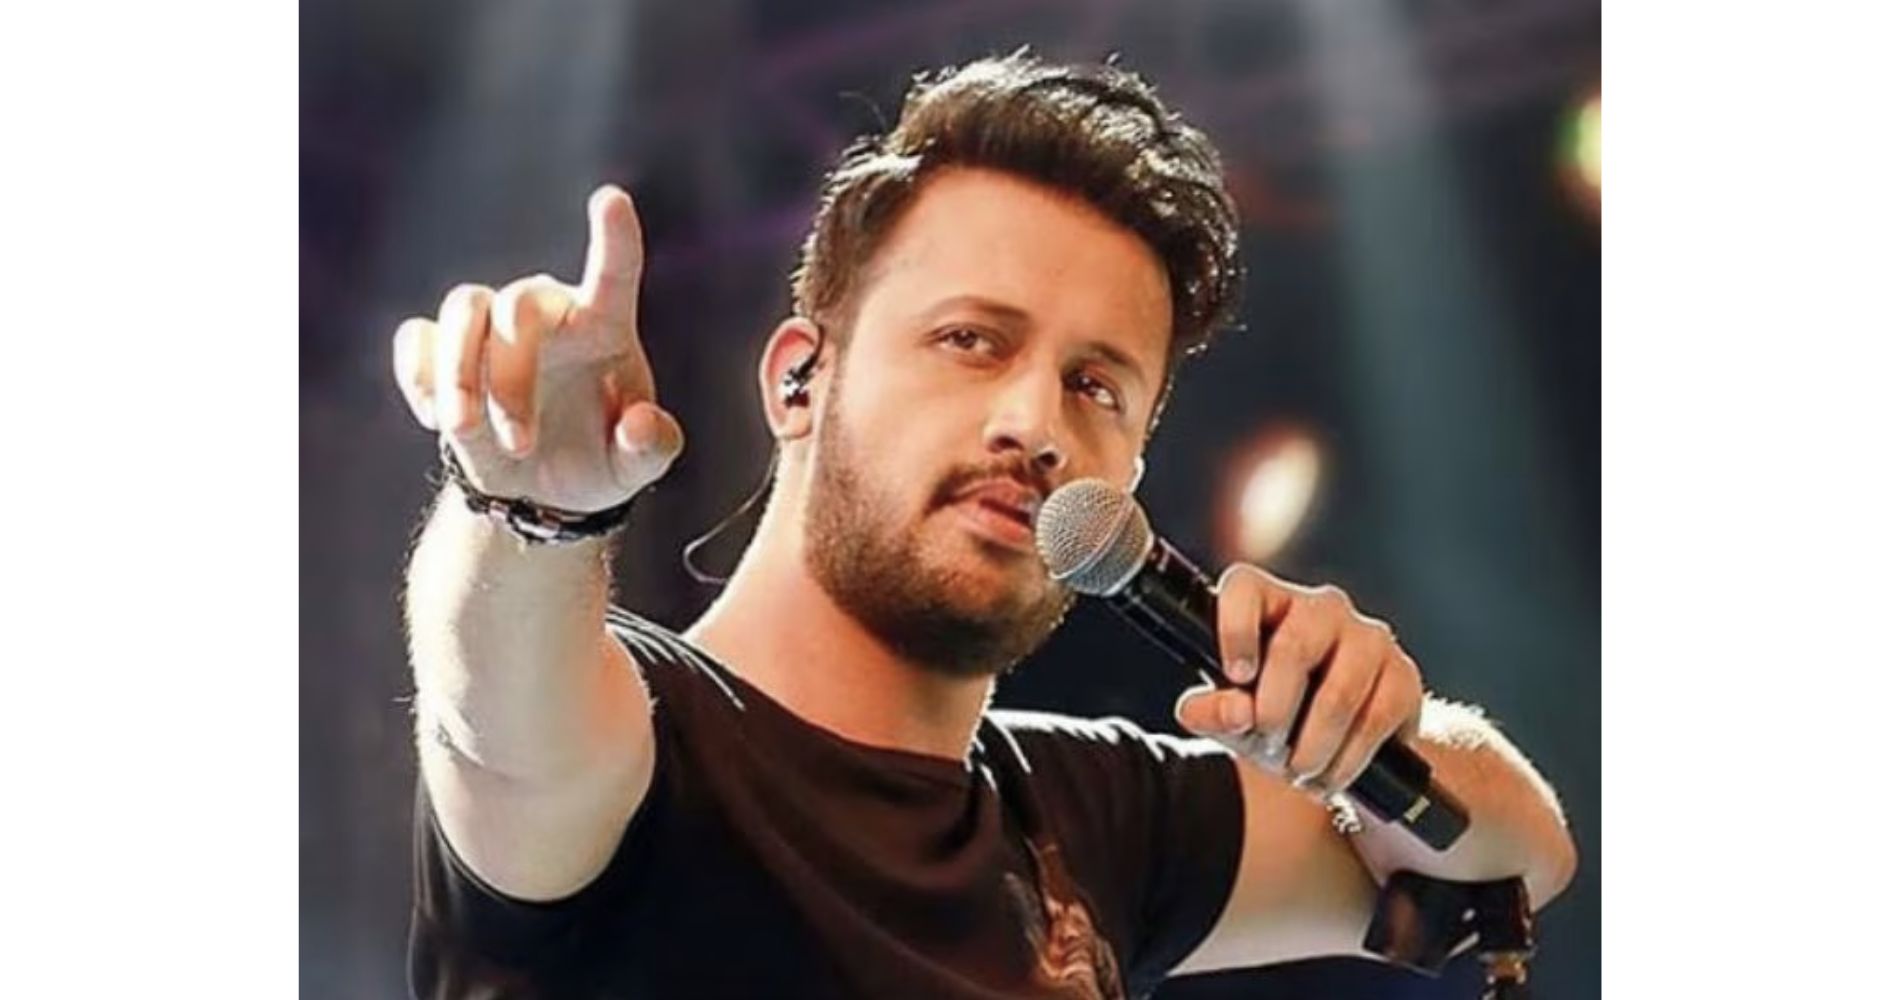 Atif Aslam's Song 'Jaane Jaa' Pulled Down In The Aftermath